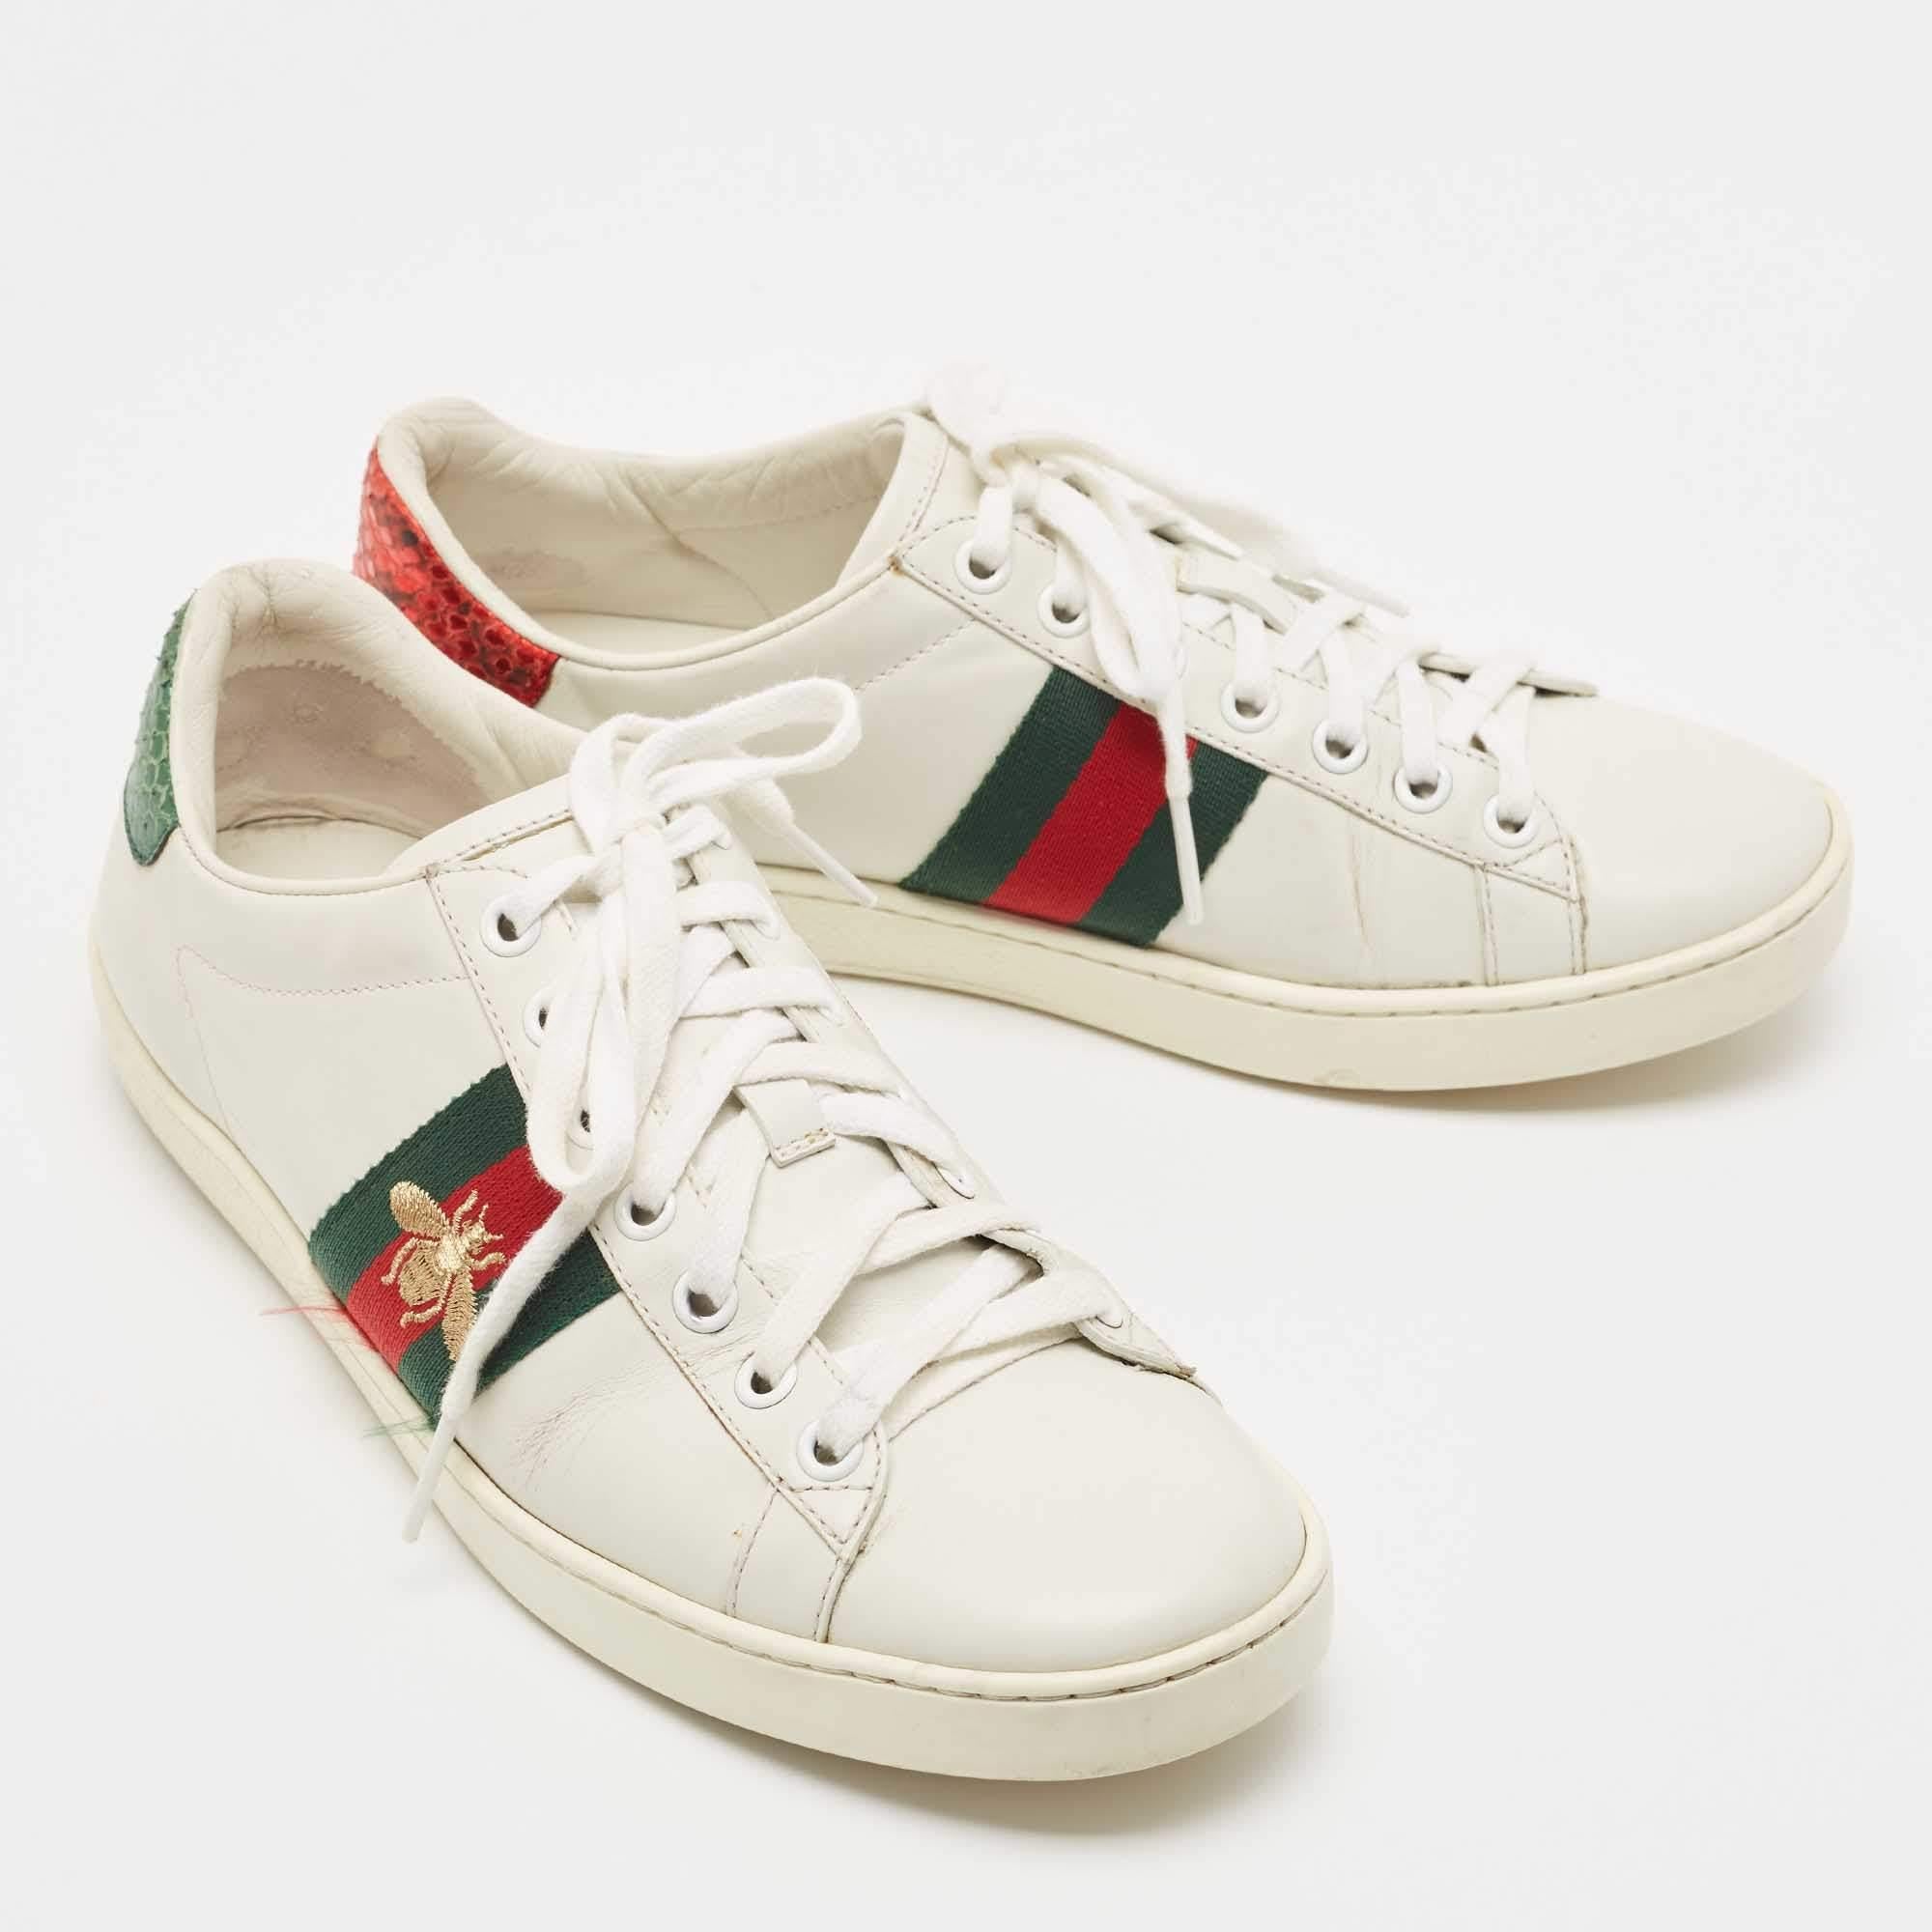 Gucci White Leather Embroidered Bee Ace Sneakers Size 37.5 For Sale 1